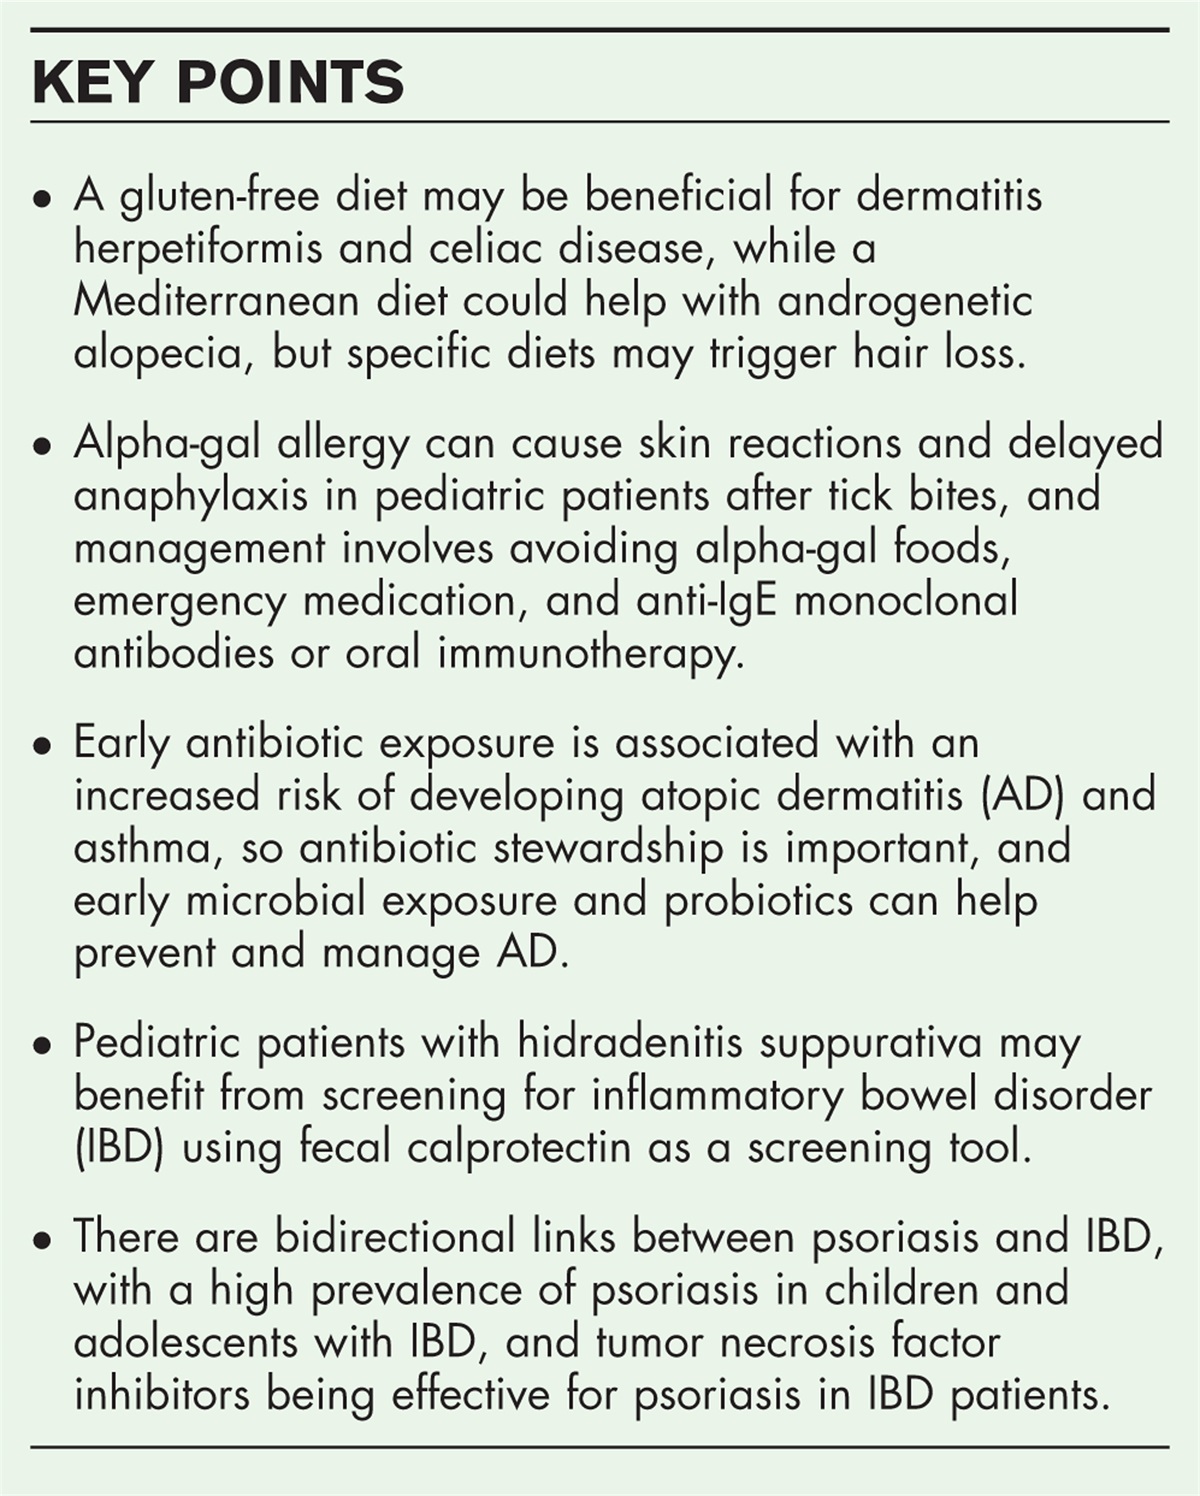 The role of nutrition, food allergies, and gut dysbiosis in immune-mediated inflammatory skin disease: a narrative review